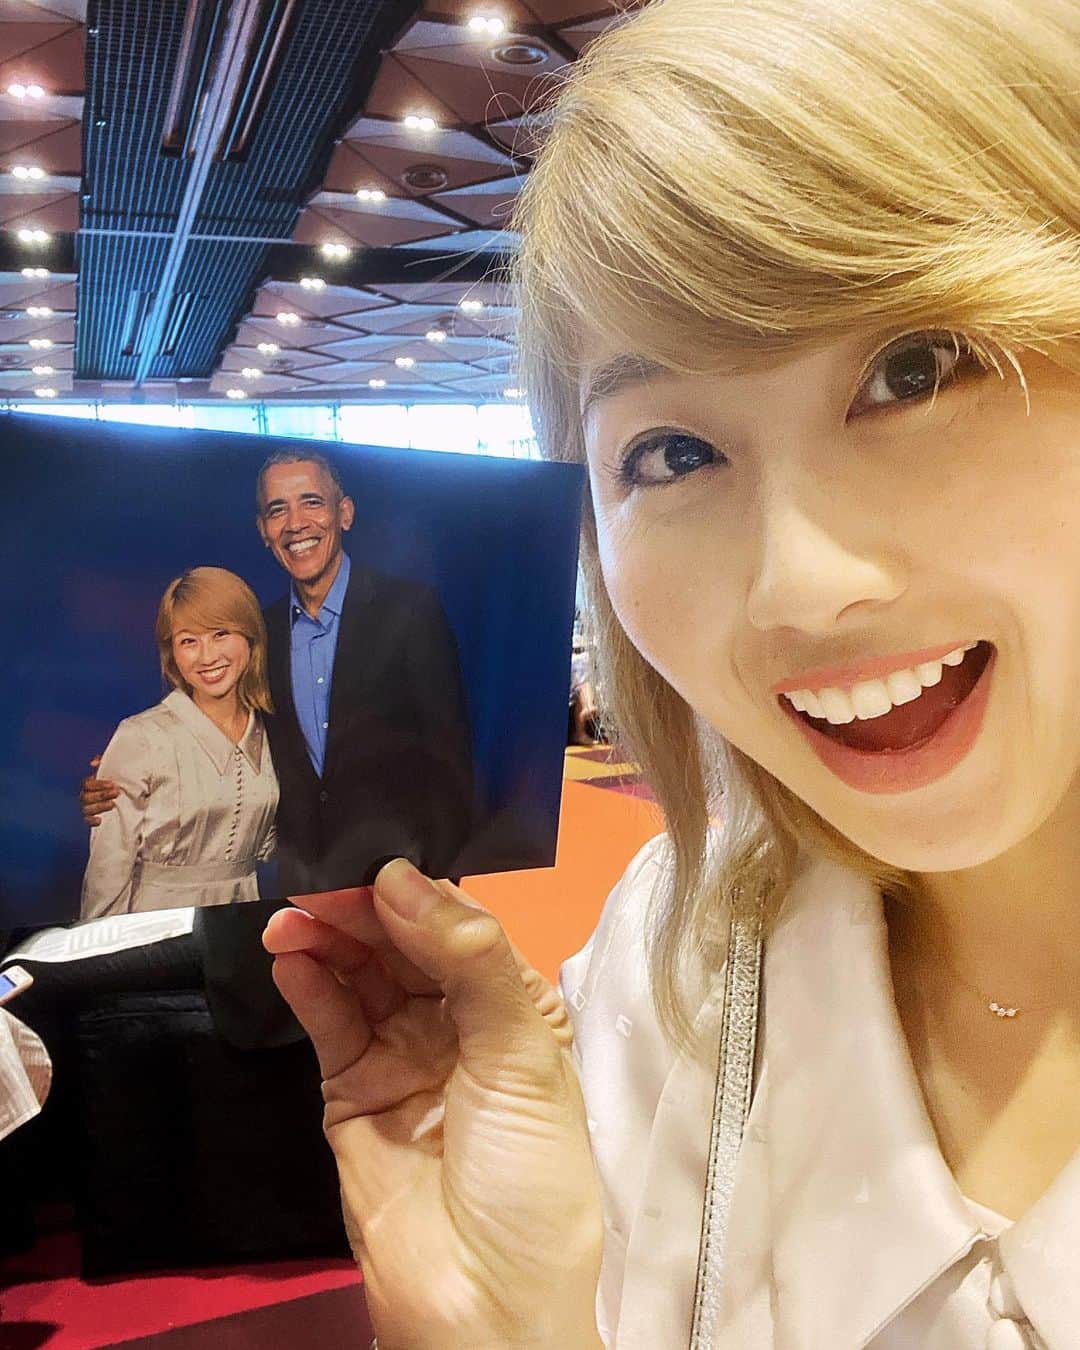 吉田ちかさんのインスタグラム写真 - (吉田ちかInstagram)「Got a photo with President Barack Obama! (Again, not at Madame Tussaud’s!) It’s just unbelievable all of the amazing opportunities being a YouTube creator has given me over the years. We had the privilege of sitting front and center at an event hosted by The Growth Faculty to hear about President Obama’s thoughts and approach on leadership and team building. ﻿ ﻿ As you can see in the photo he was so friendly and down to earth. We had a second to shake hands and snap a photo and I told him that this was the first trip I’ve taken without my 18 month old daughter and that her daddy is watching her. His smile got even friendlier and he replied “that must have been hard, but moms need a break too. That’s important.” For a split second I felt like  I was talking to an experienced parent, not the former President of the United States. He kept that relatableness (don’t think that’s a word) and human-ness (this one isn’t either) throughout his talk session and so much of what he shared about leadership and team building are things I need to apply to the next stage of my career. So much food for thought! A big thanks President Obama for sharing his stories and to the team at Google for giving me such an amazing opportunity! ﻿ ﻿ オバマ元大統領とまさかのツーショット！本物です！マダムタッソーじゃないよ🤣この前言ってたスペシャルなイベントはこちらでした！YouTuberになってこんなにも色んな貴重な体験をできるなんて(いつも言いますがw) 本当に人生って何が起きるかわからない！今回はThe Growth Faculty主催のイベントでオバマ元大統領のリーダーシップやチーム作りに関するお話を最前列で聞かせてもらいました！﻿ ﻿ 写真でもわかる通り、実際もとっても優しくて気さくな方。一瞬でしたが撮影会で「今回初めて娘を置いて来たんです。今パパが見てくれています。」と伝えたら表情がよりフレンドリーになり、「それは大変だったね。でも、ママも休まないと。大事だよ。」と温かく言ってくれました。その瞬間はアメリカの元大統領と話しているのではなく、経験のあるパパと話している感じでした。﻿ ﻿ トークセッション自体も(国を動かす想像もできない規模感は置いといてw) 親近感が湧くように色々とお話してくださり、リーダーシップそしてチーム作りに関するお話は自分のキャリアの次のステージに活かさないといけないことばかりで色々と考えさせられました。(英語で書いてる”food for thought”は、考えるための材料という意味です☆) ﻿ ﻿ イベントは撮影禁止だったのでシェアできませんが、より詳しい内容と感想は動画でシェアできたらと思います！﻿ ﻿ #ママに一人旅させてくれたおさるさんとプリンに感謝❤️」12月17日 15時28分 - bilingirl_chika